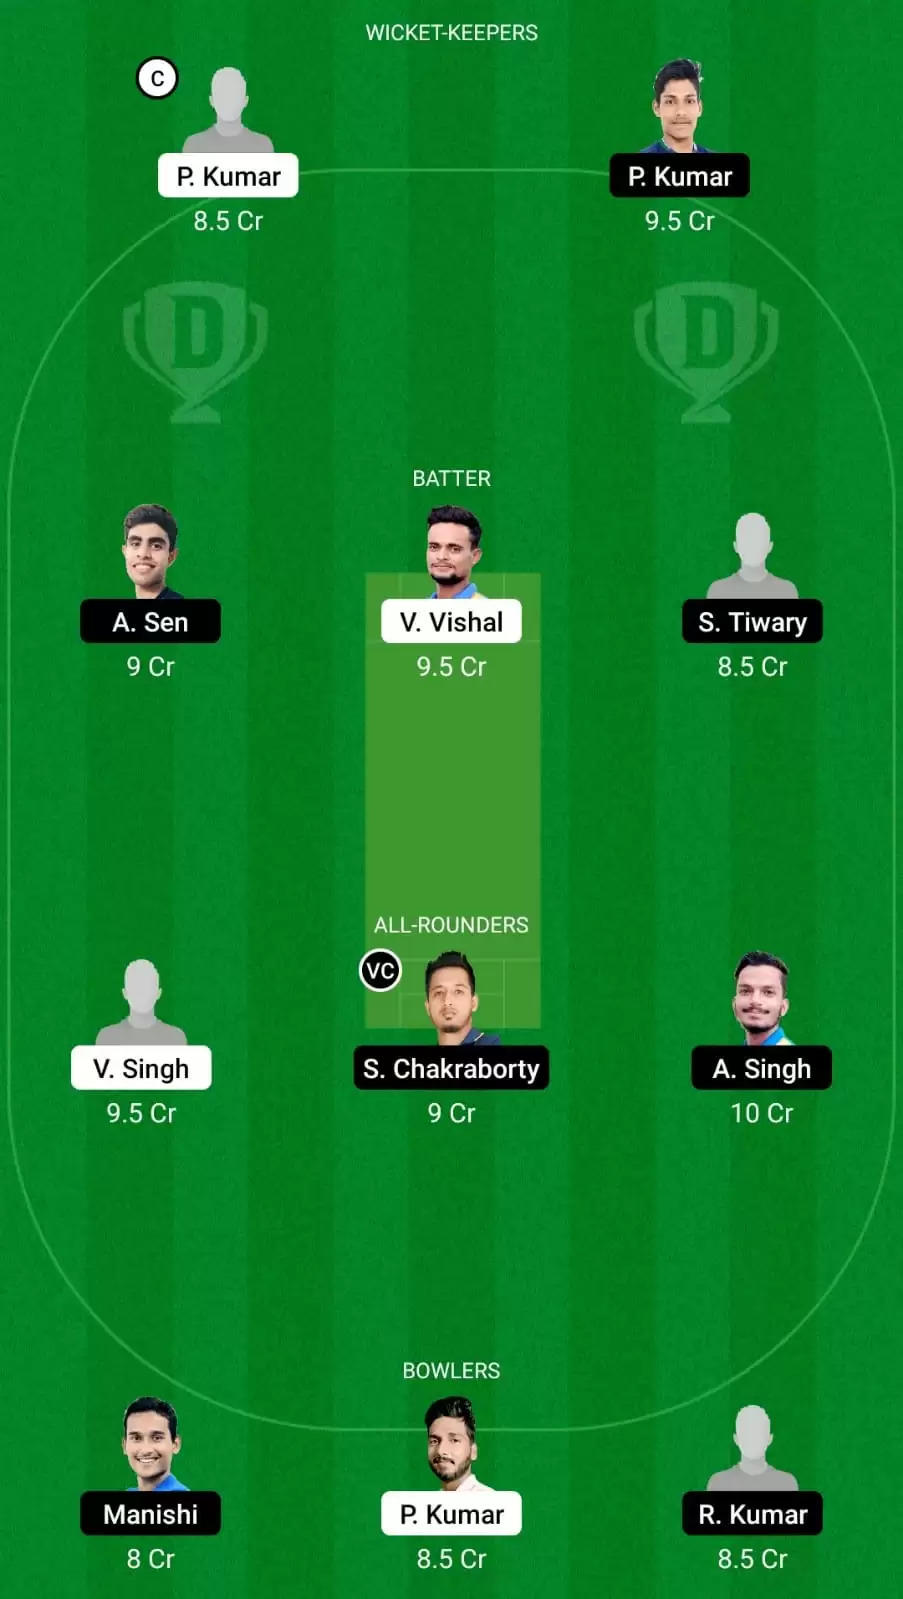 BOK vs RAN Dream11 Team Prediction for Jharkhand T20 League 2021: Bokaro Blasters vs Ranchi Raiders Best Fantasy Cricket Tips, Strongest Playing XI, Pitch Report and Player Updates